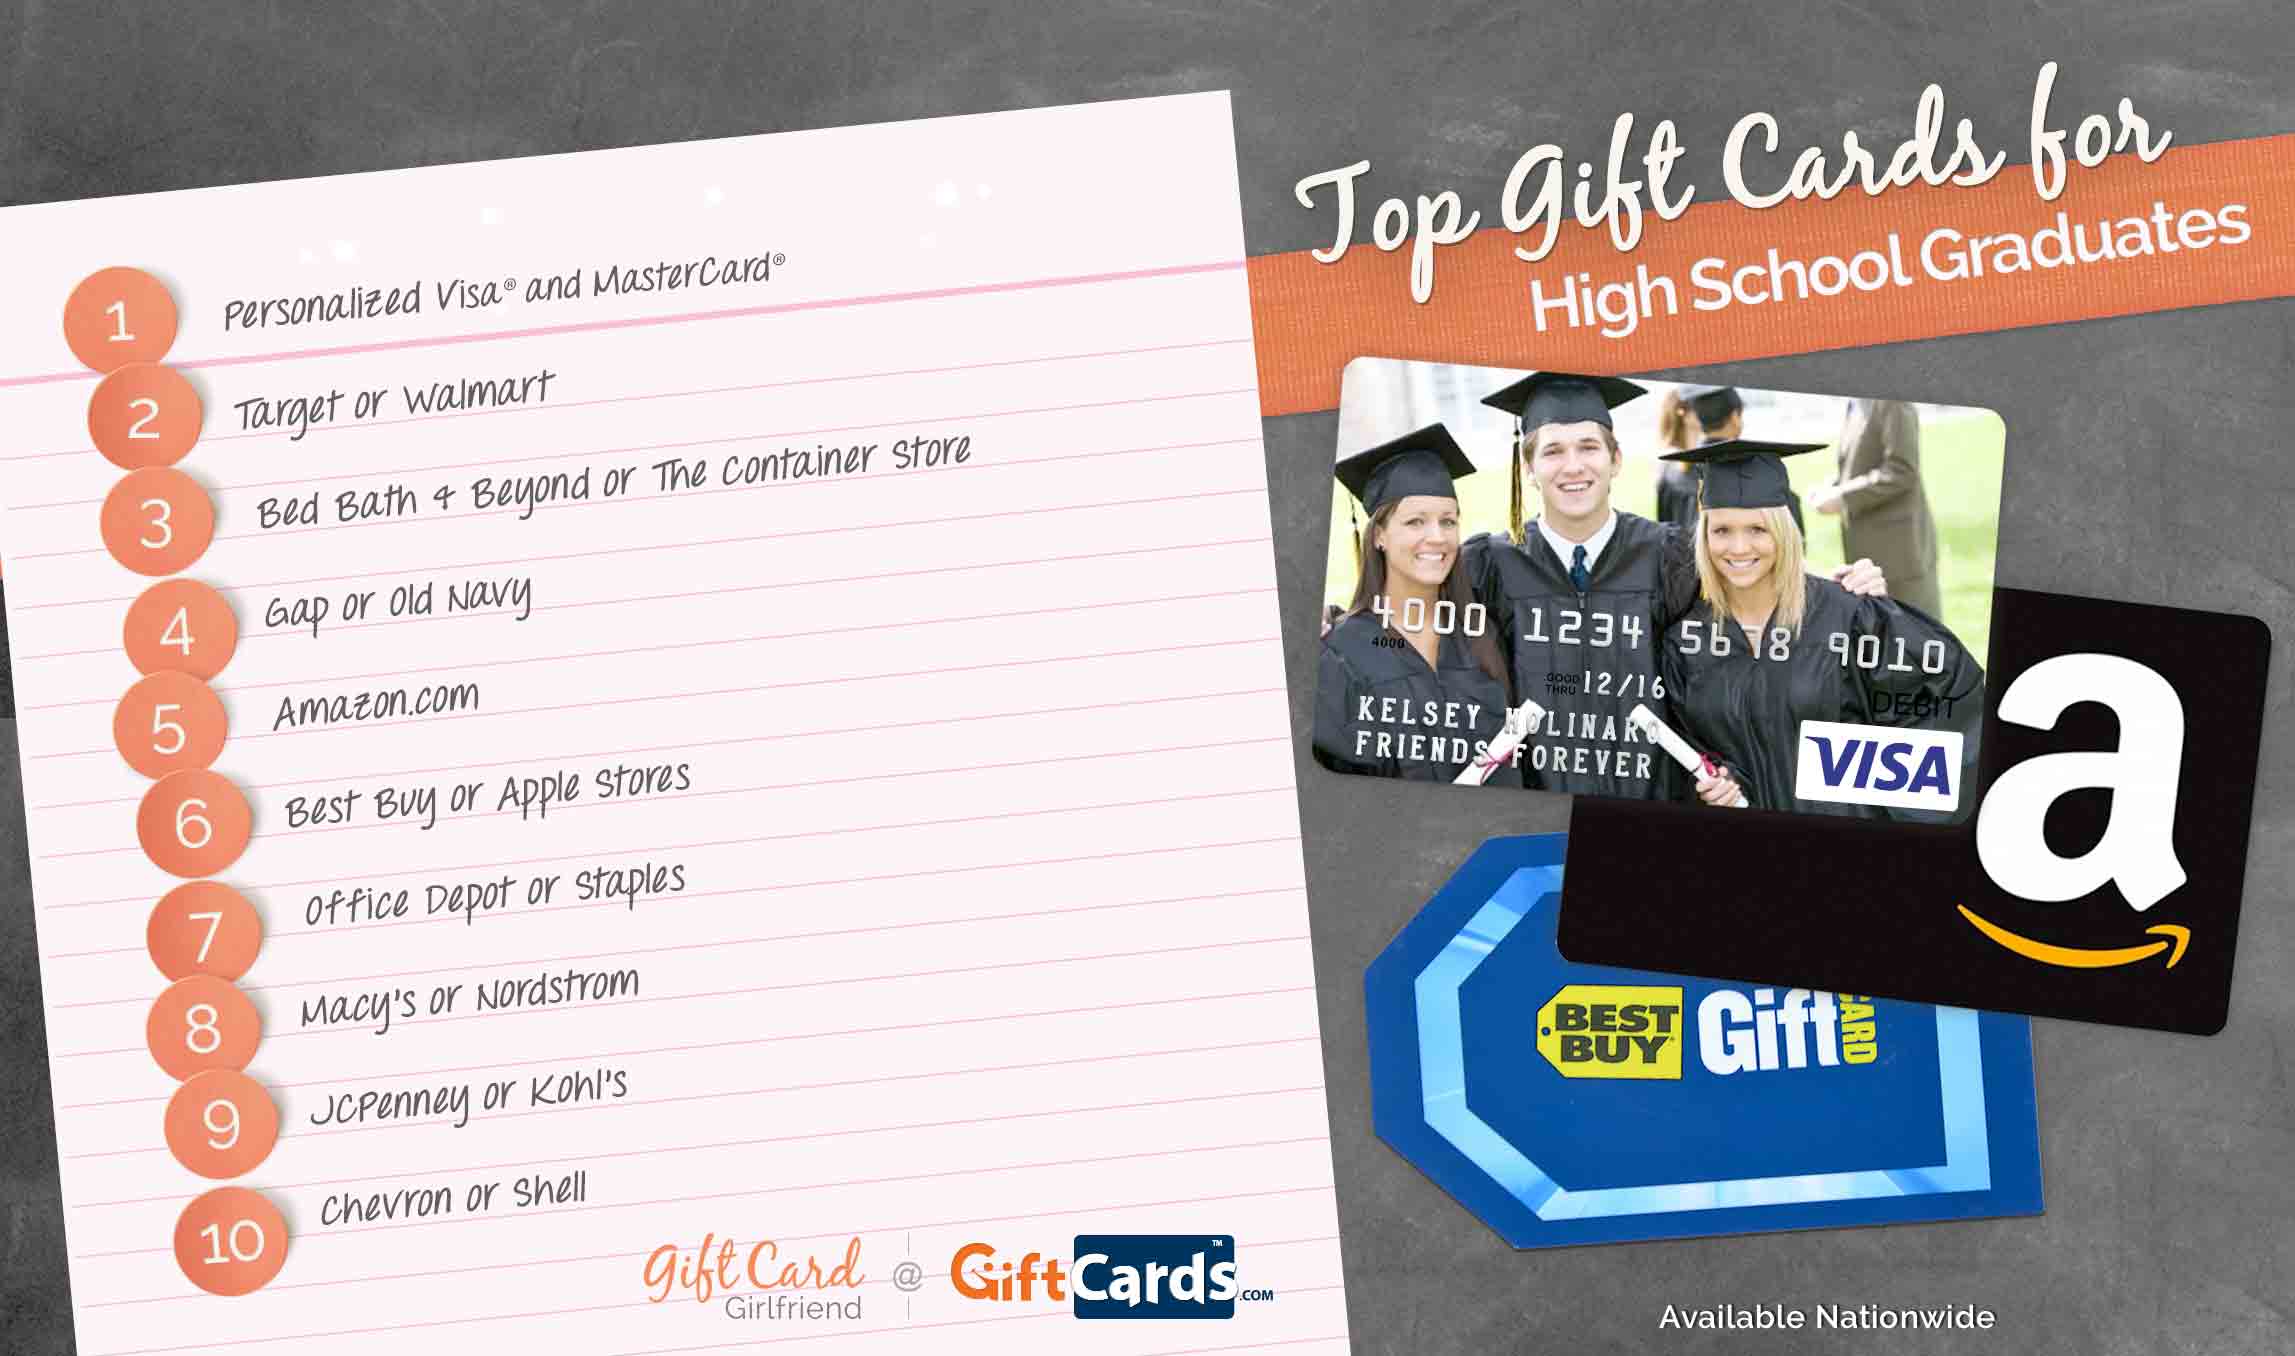 top 10 gift cards for high school graduates | gcg